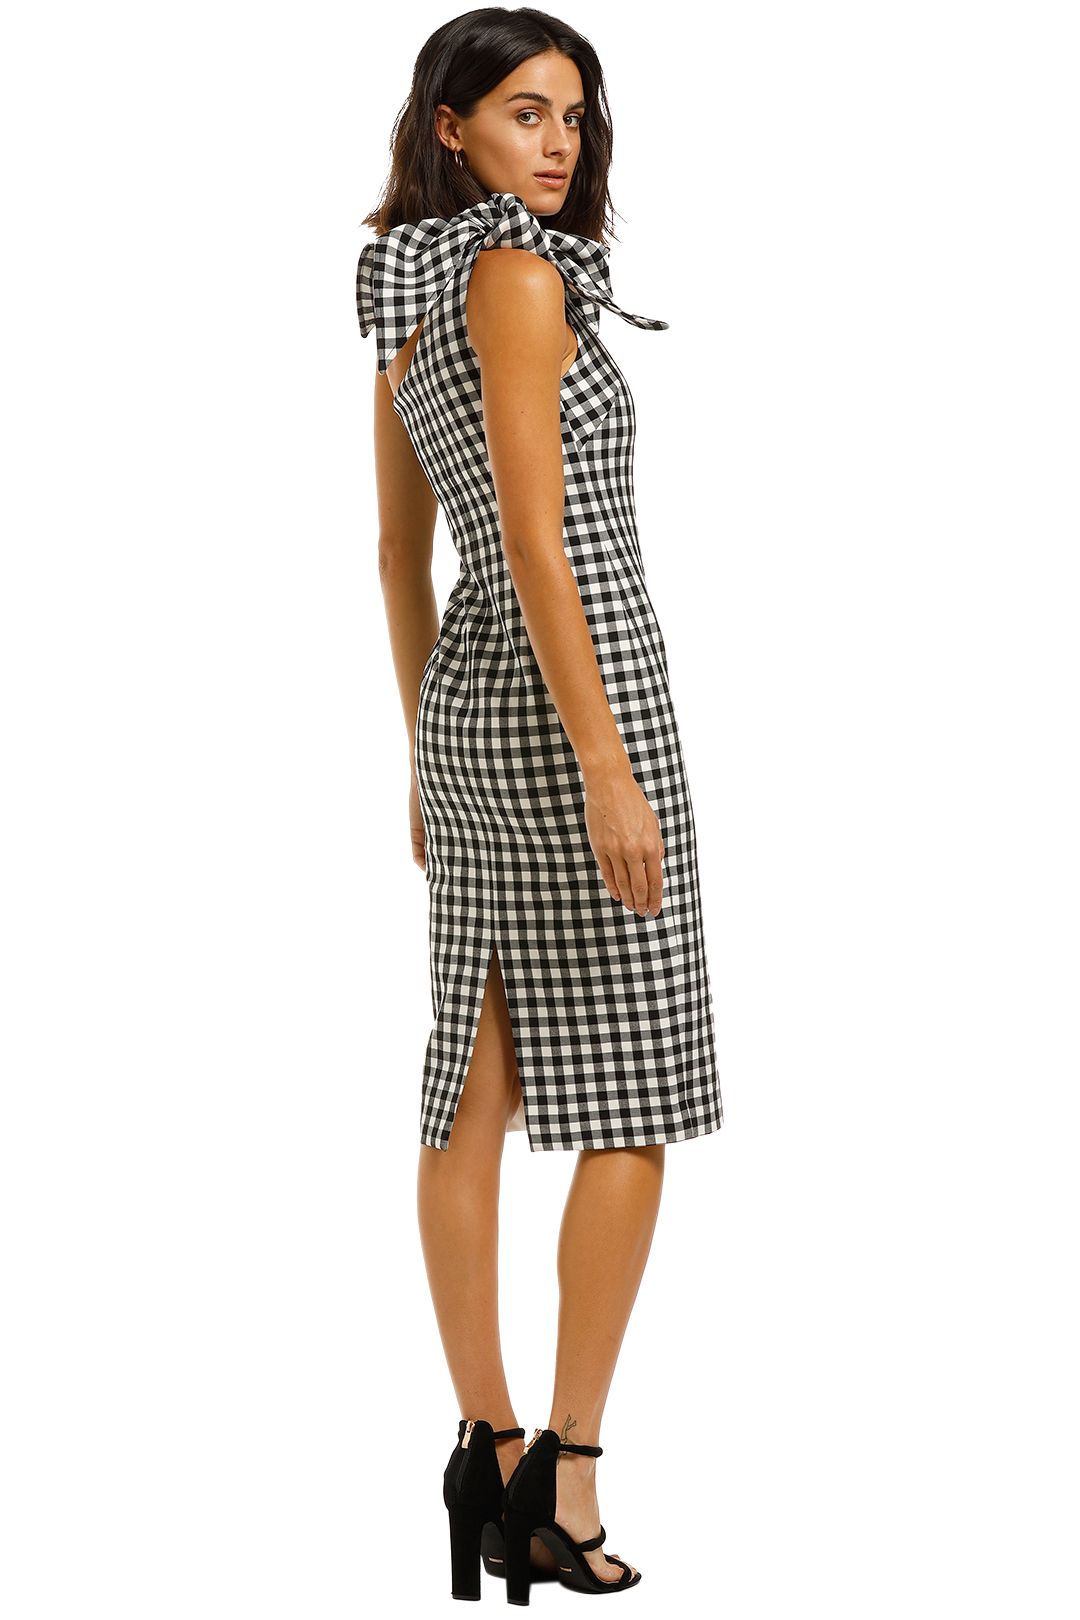 By-Johnny-Georgie-Gingham-Tie-Midi-Black-and-White-Back